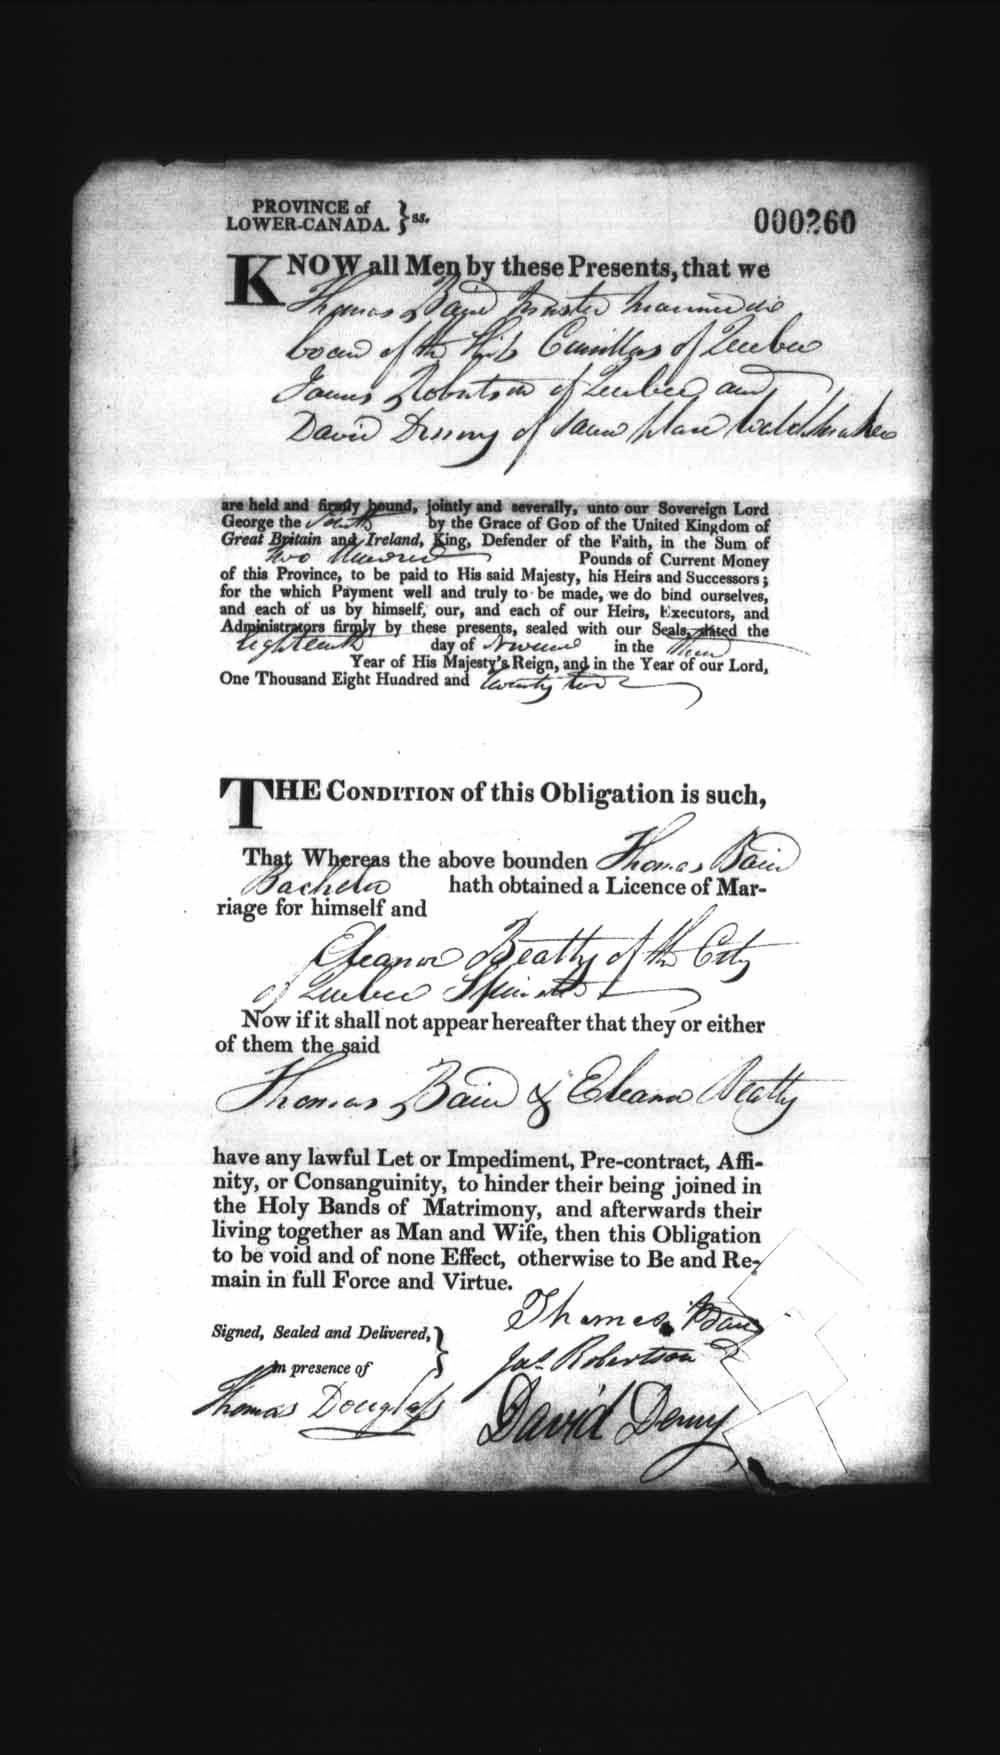 Digitized page of Upper and Lower Canada Marriage Bonds (1779-1865) for Image No.: e008236125